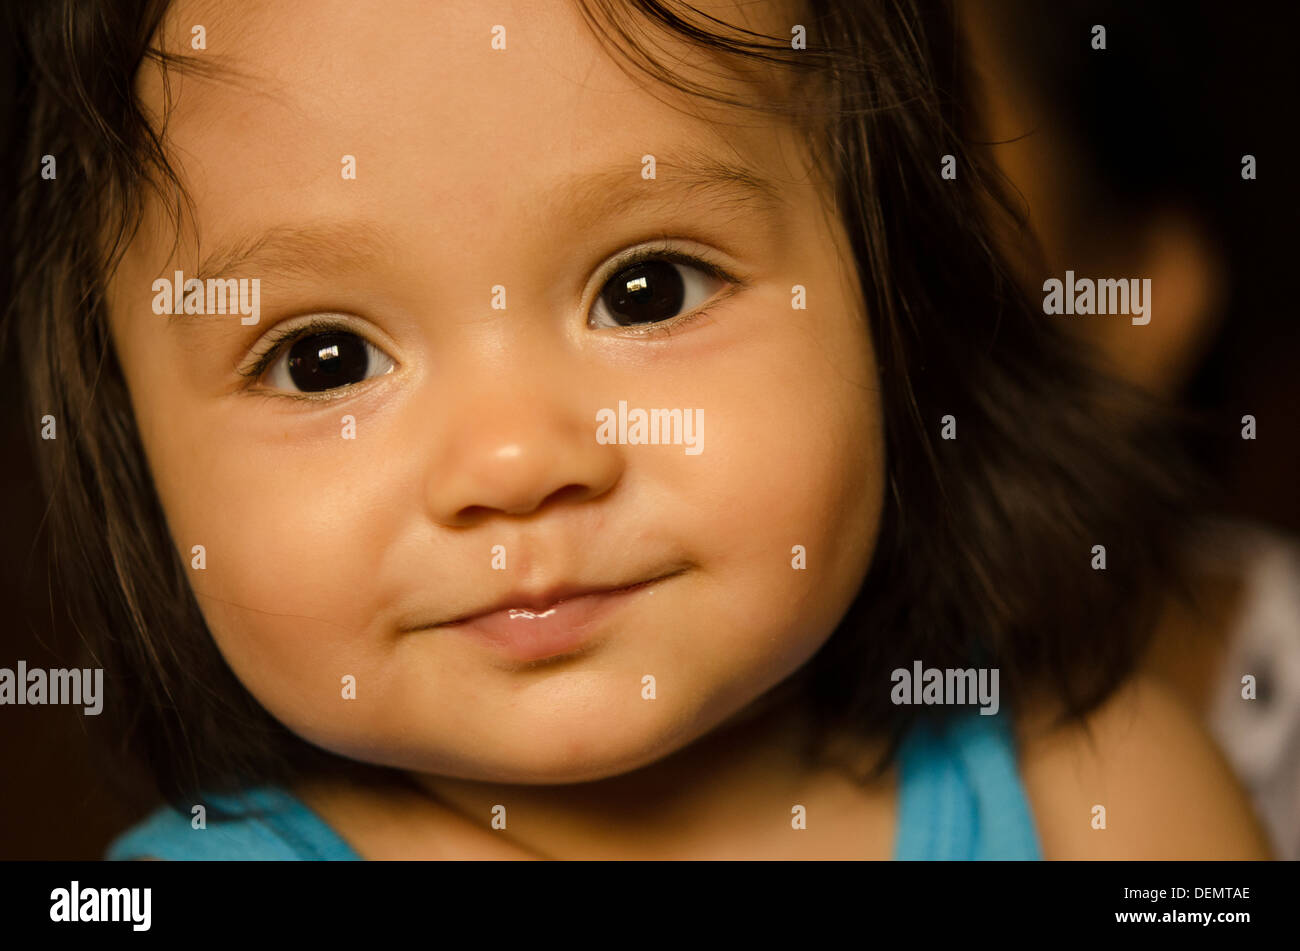 one-year old girl Stock Photo